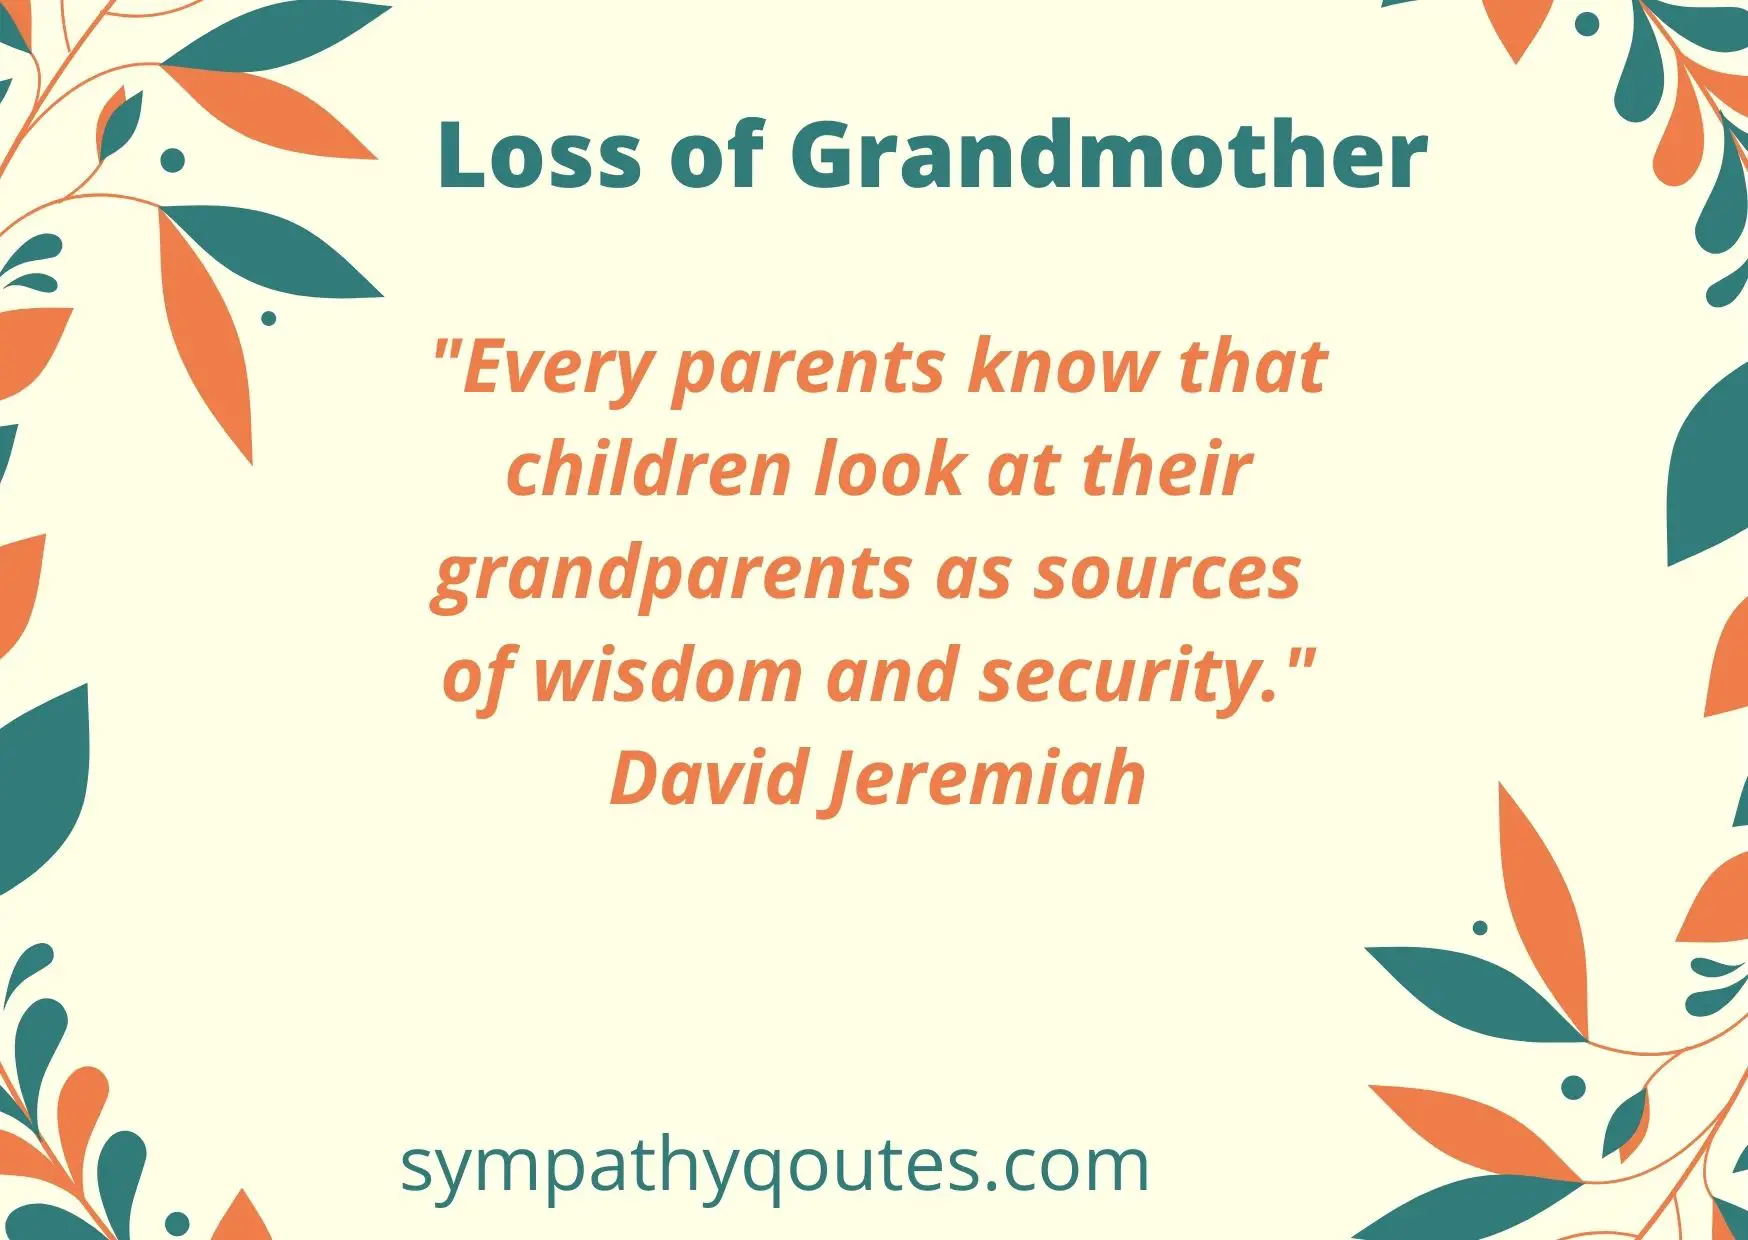  Sympathy Quotes for Loss of Grandmother